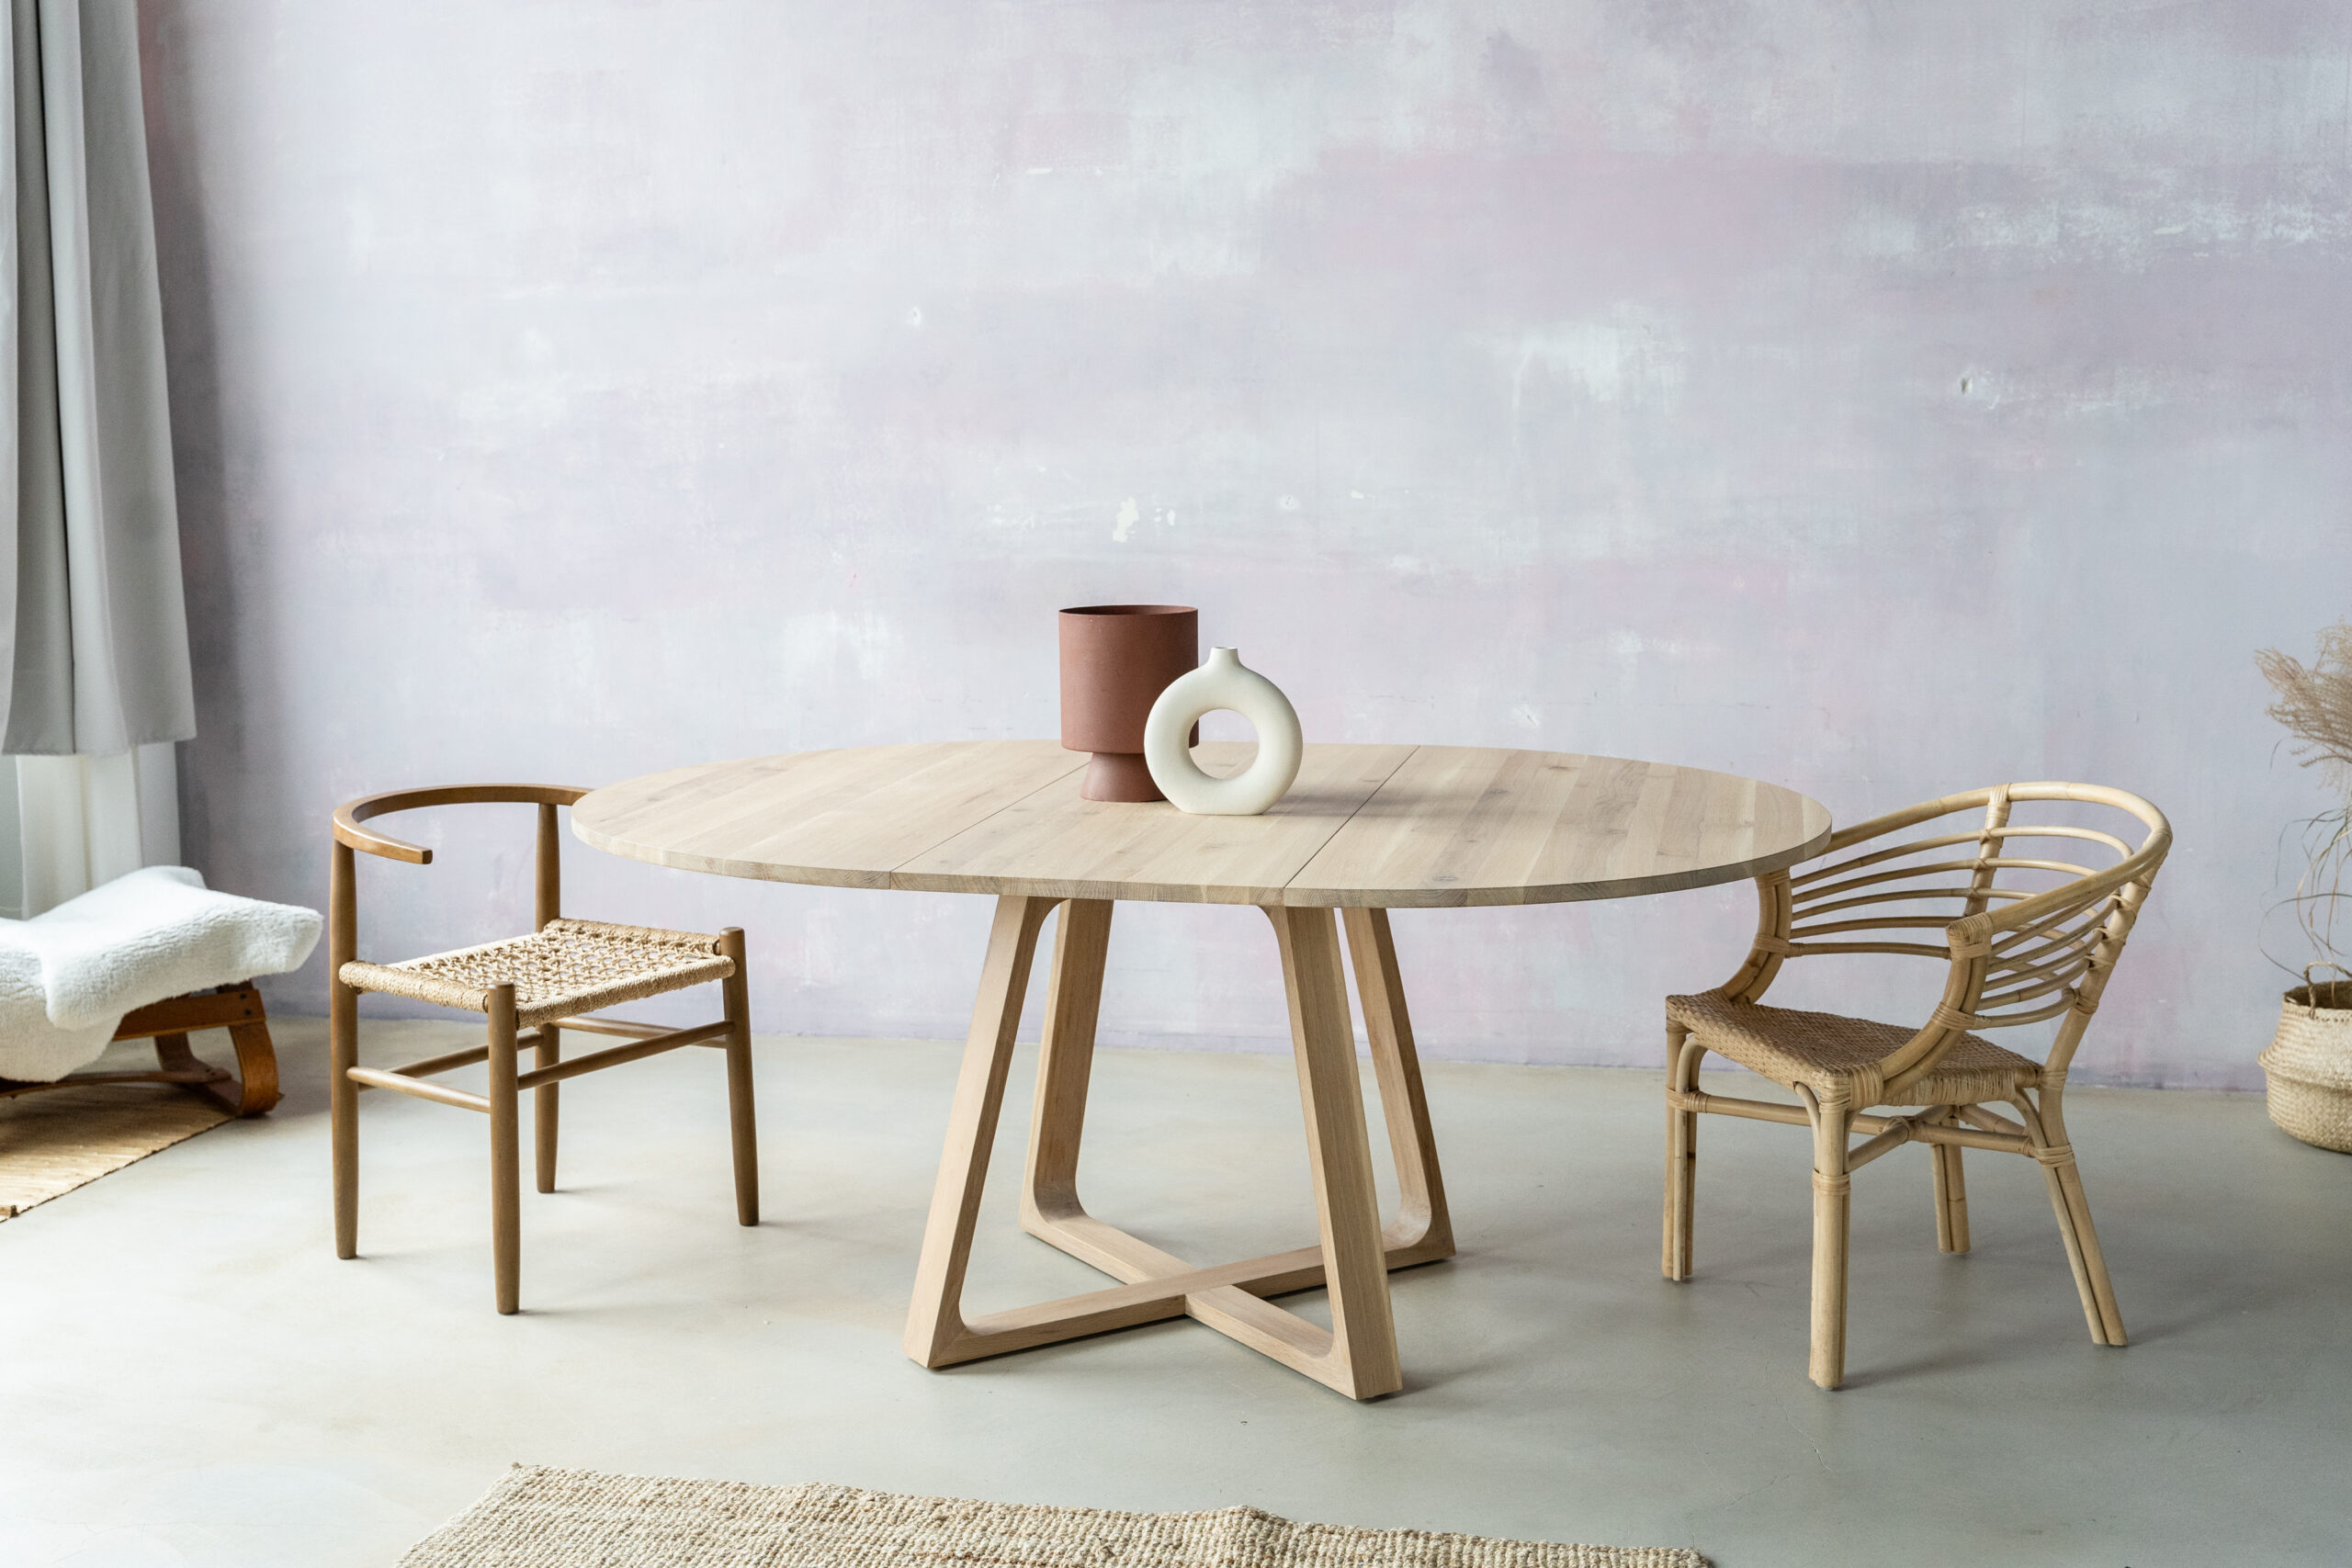 Non-_extendable round table with raw oak effect